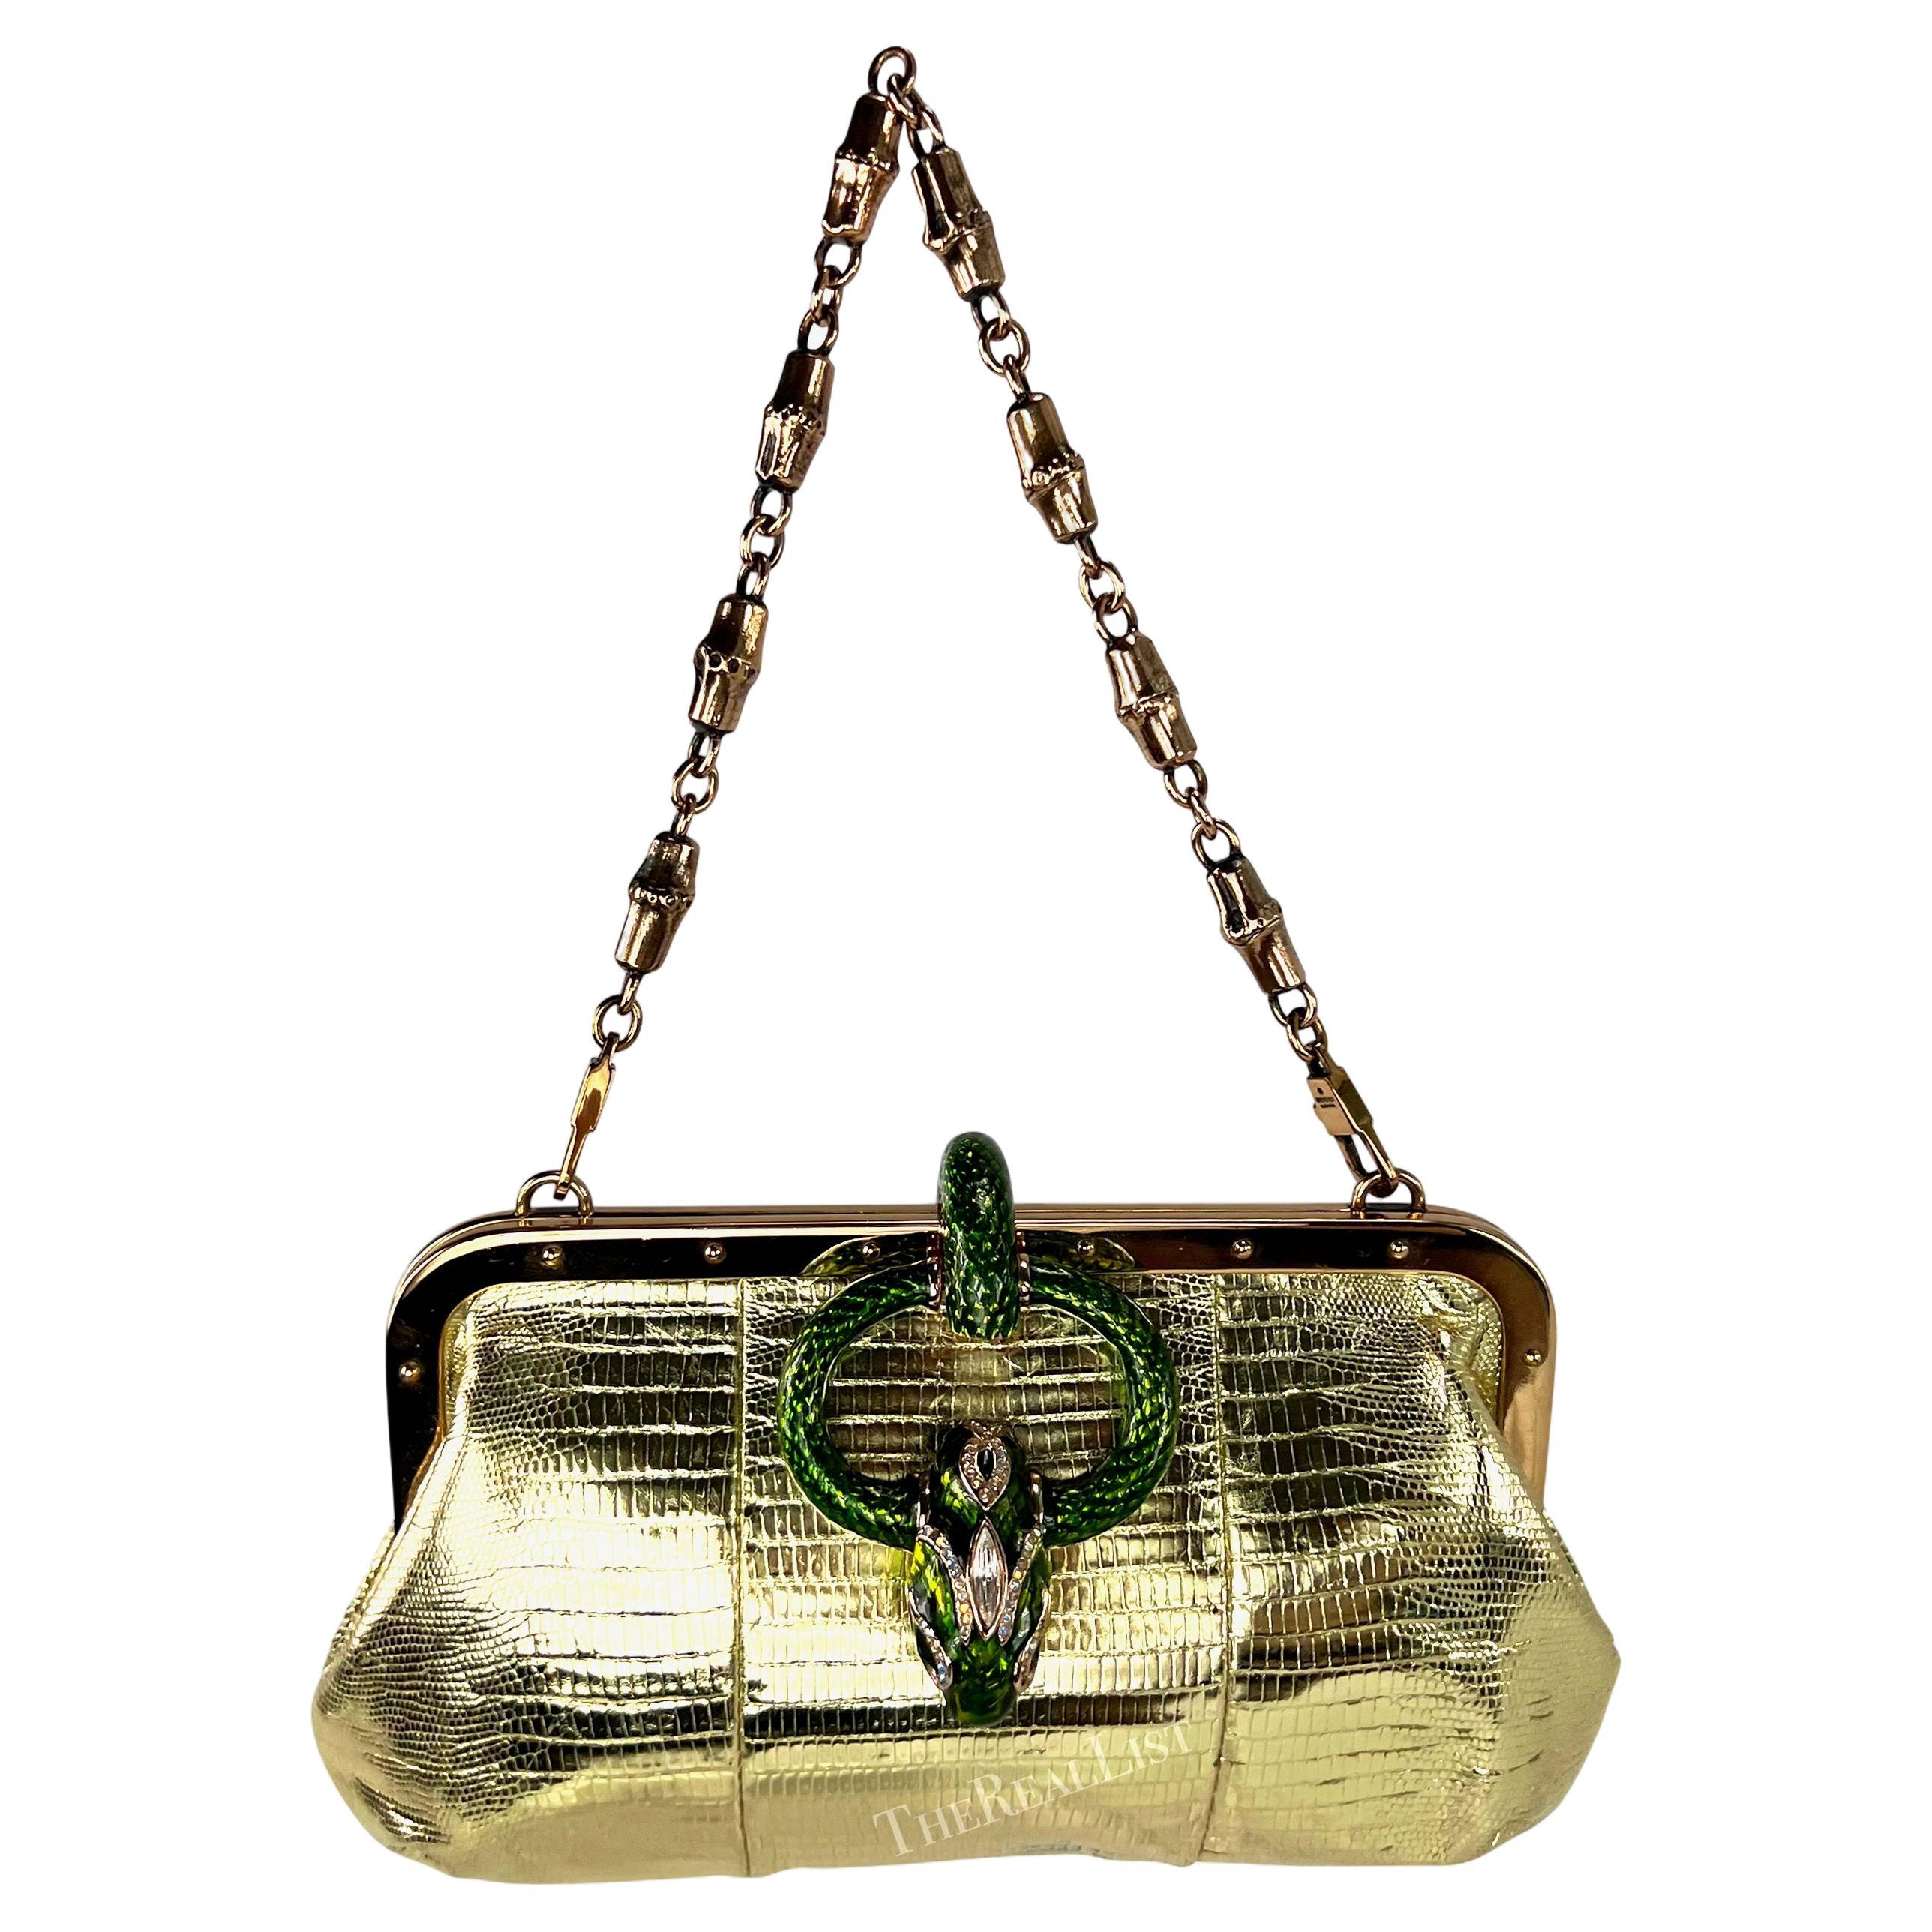 S/S 2004 Gucci by Tom Ford Runway Gold Lizard Skin Snake Convertible Bag  11